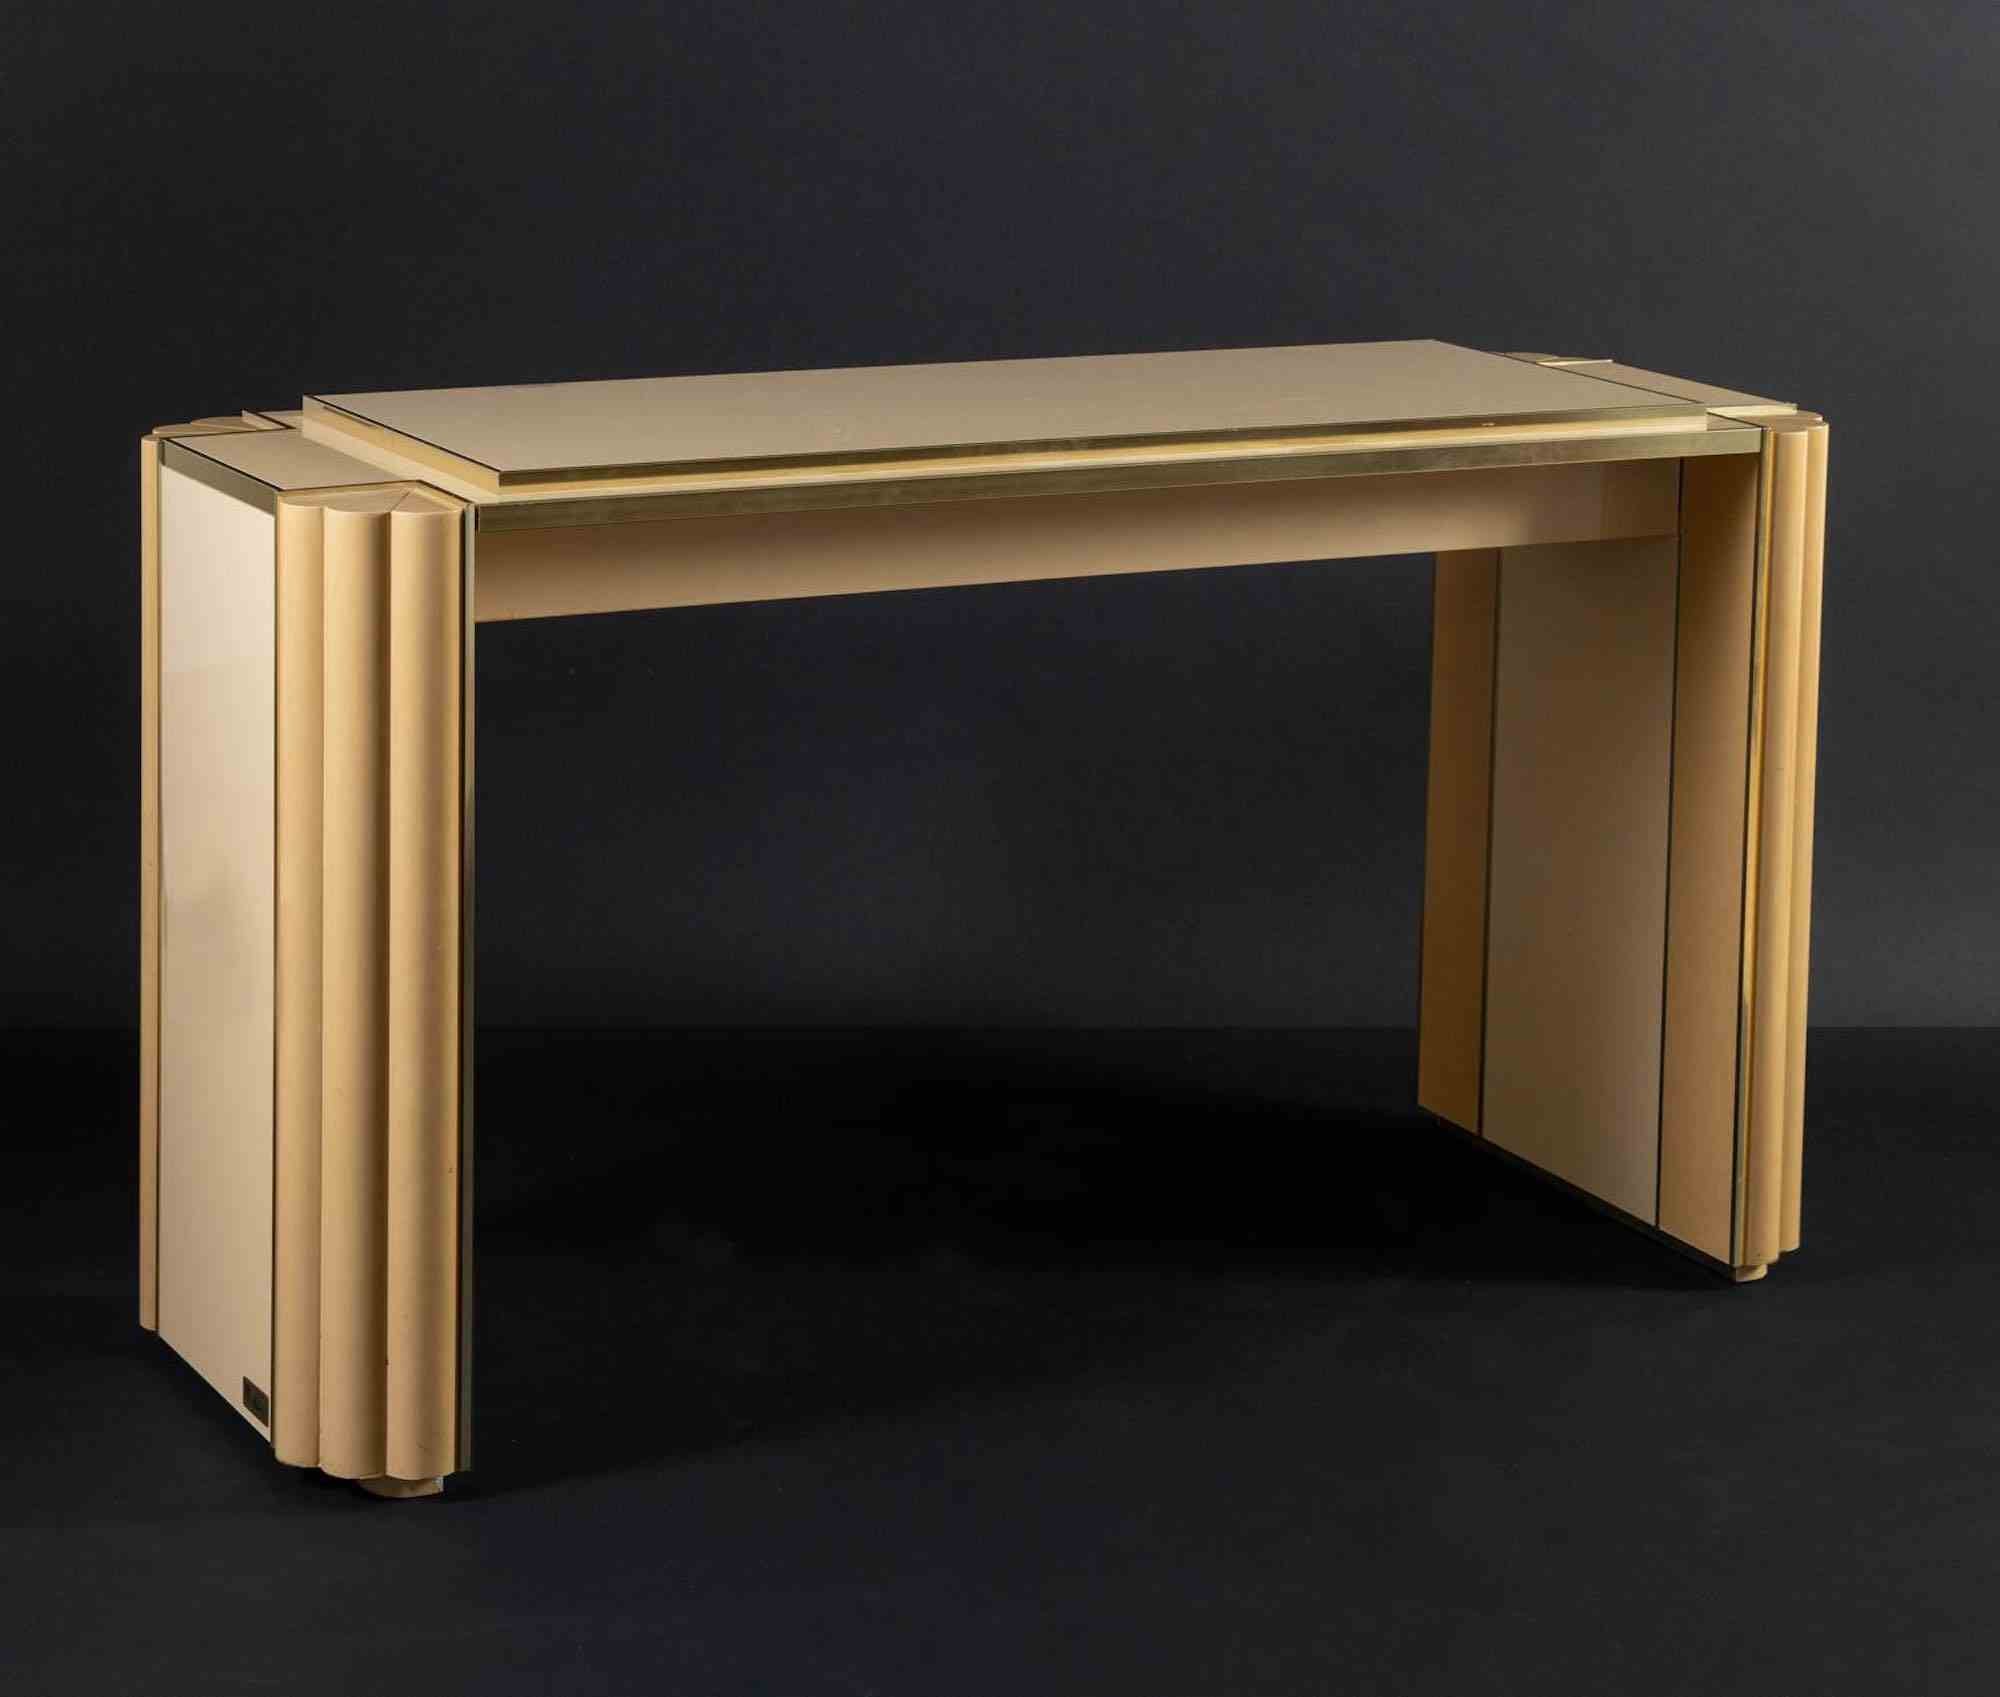 Rectangular console by Alain Delon for Maison Jansen,  1970s.

Lacquered with brass profiles, it bears a plate with the designer's signature.

H.: cm 74 x 138 x 50. 

Ref. Sabot Original Catalog - Manzano (Udine), distributor in Italy.   

Good